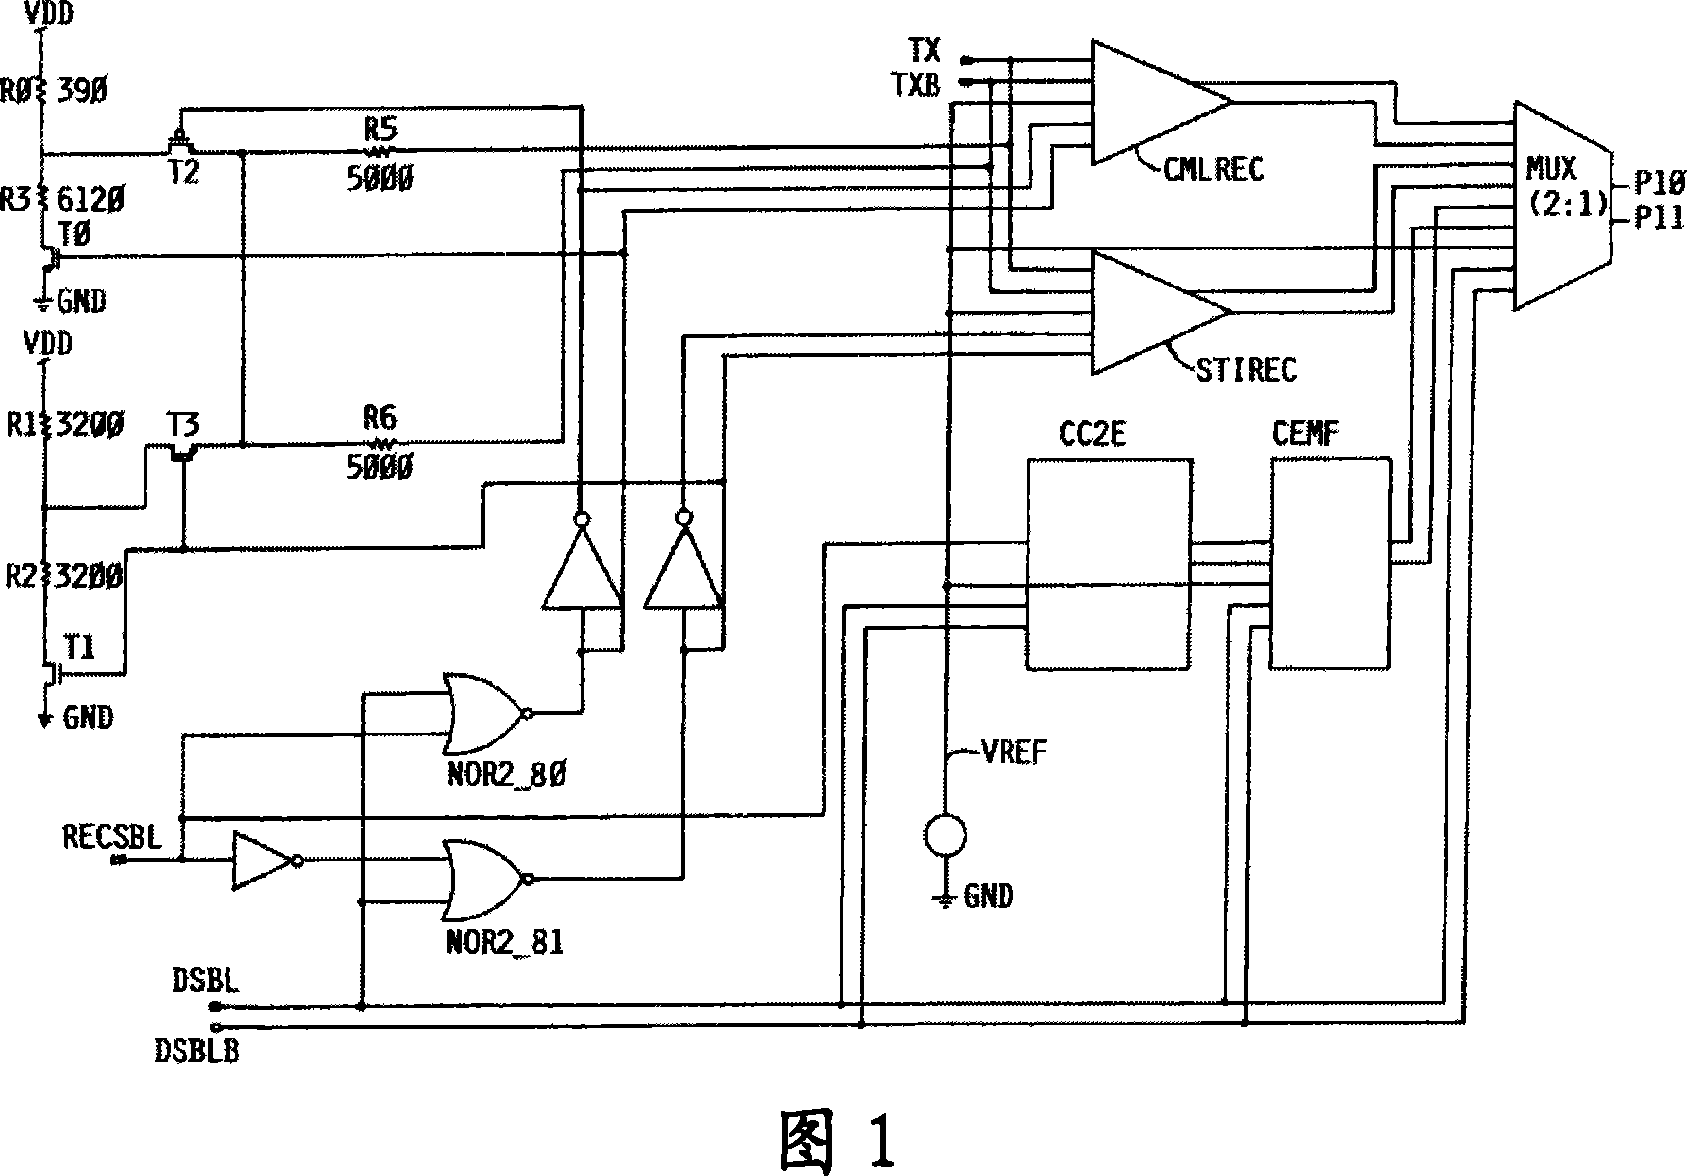 A differential signal interface circuit